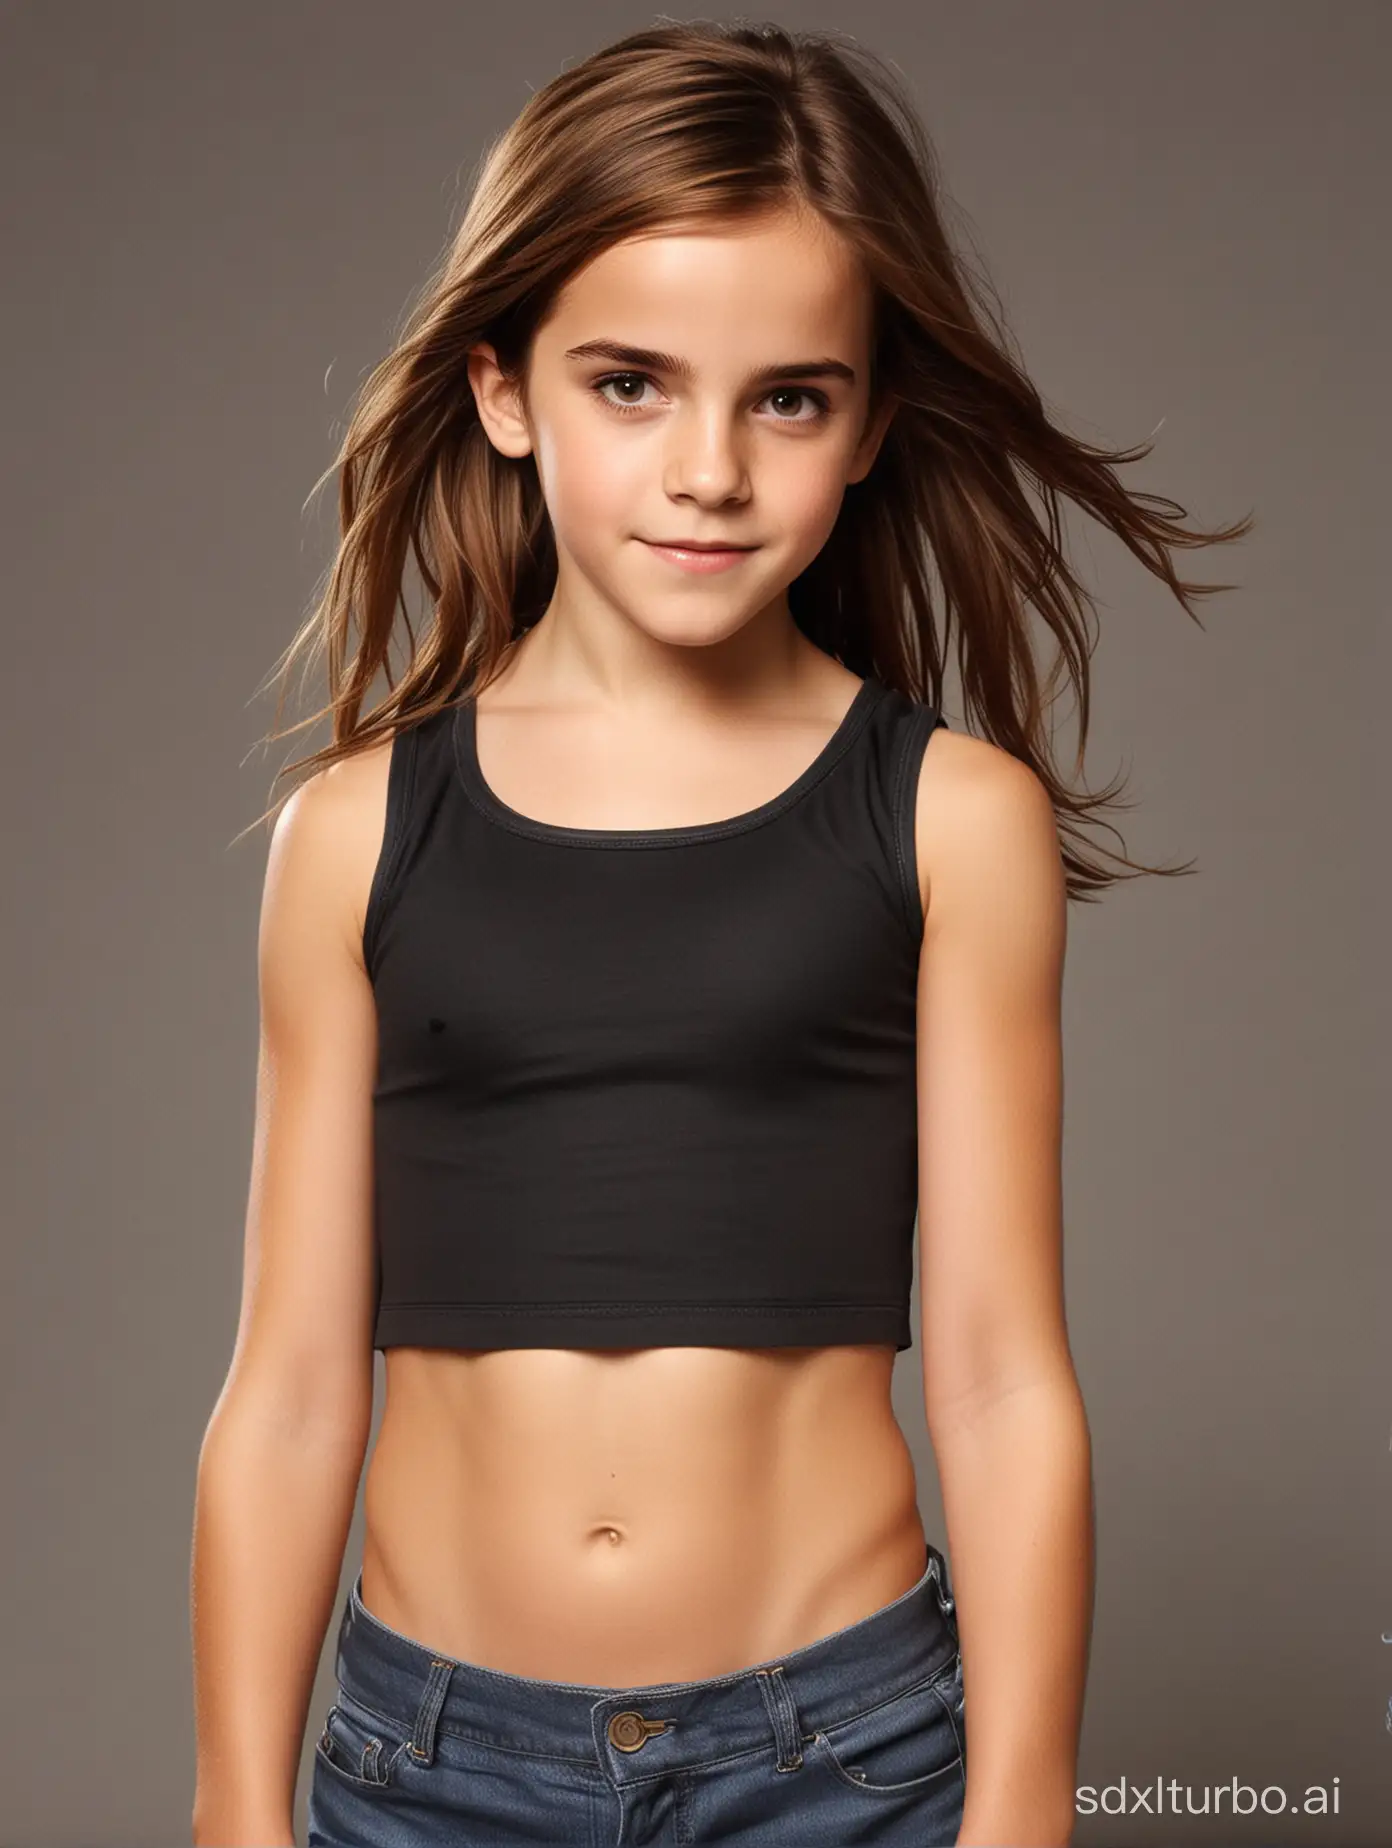 Emma-Watson-Childhood-Portrait-LongHaired-Girl-with-Defined-Muscular-Abs